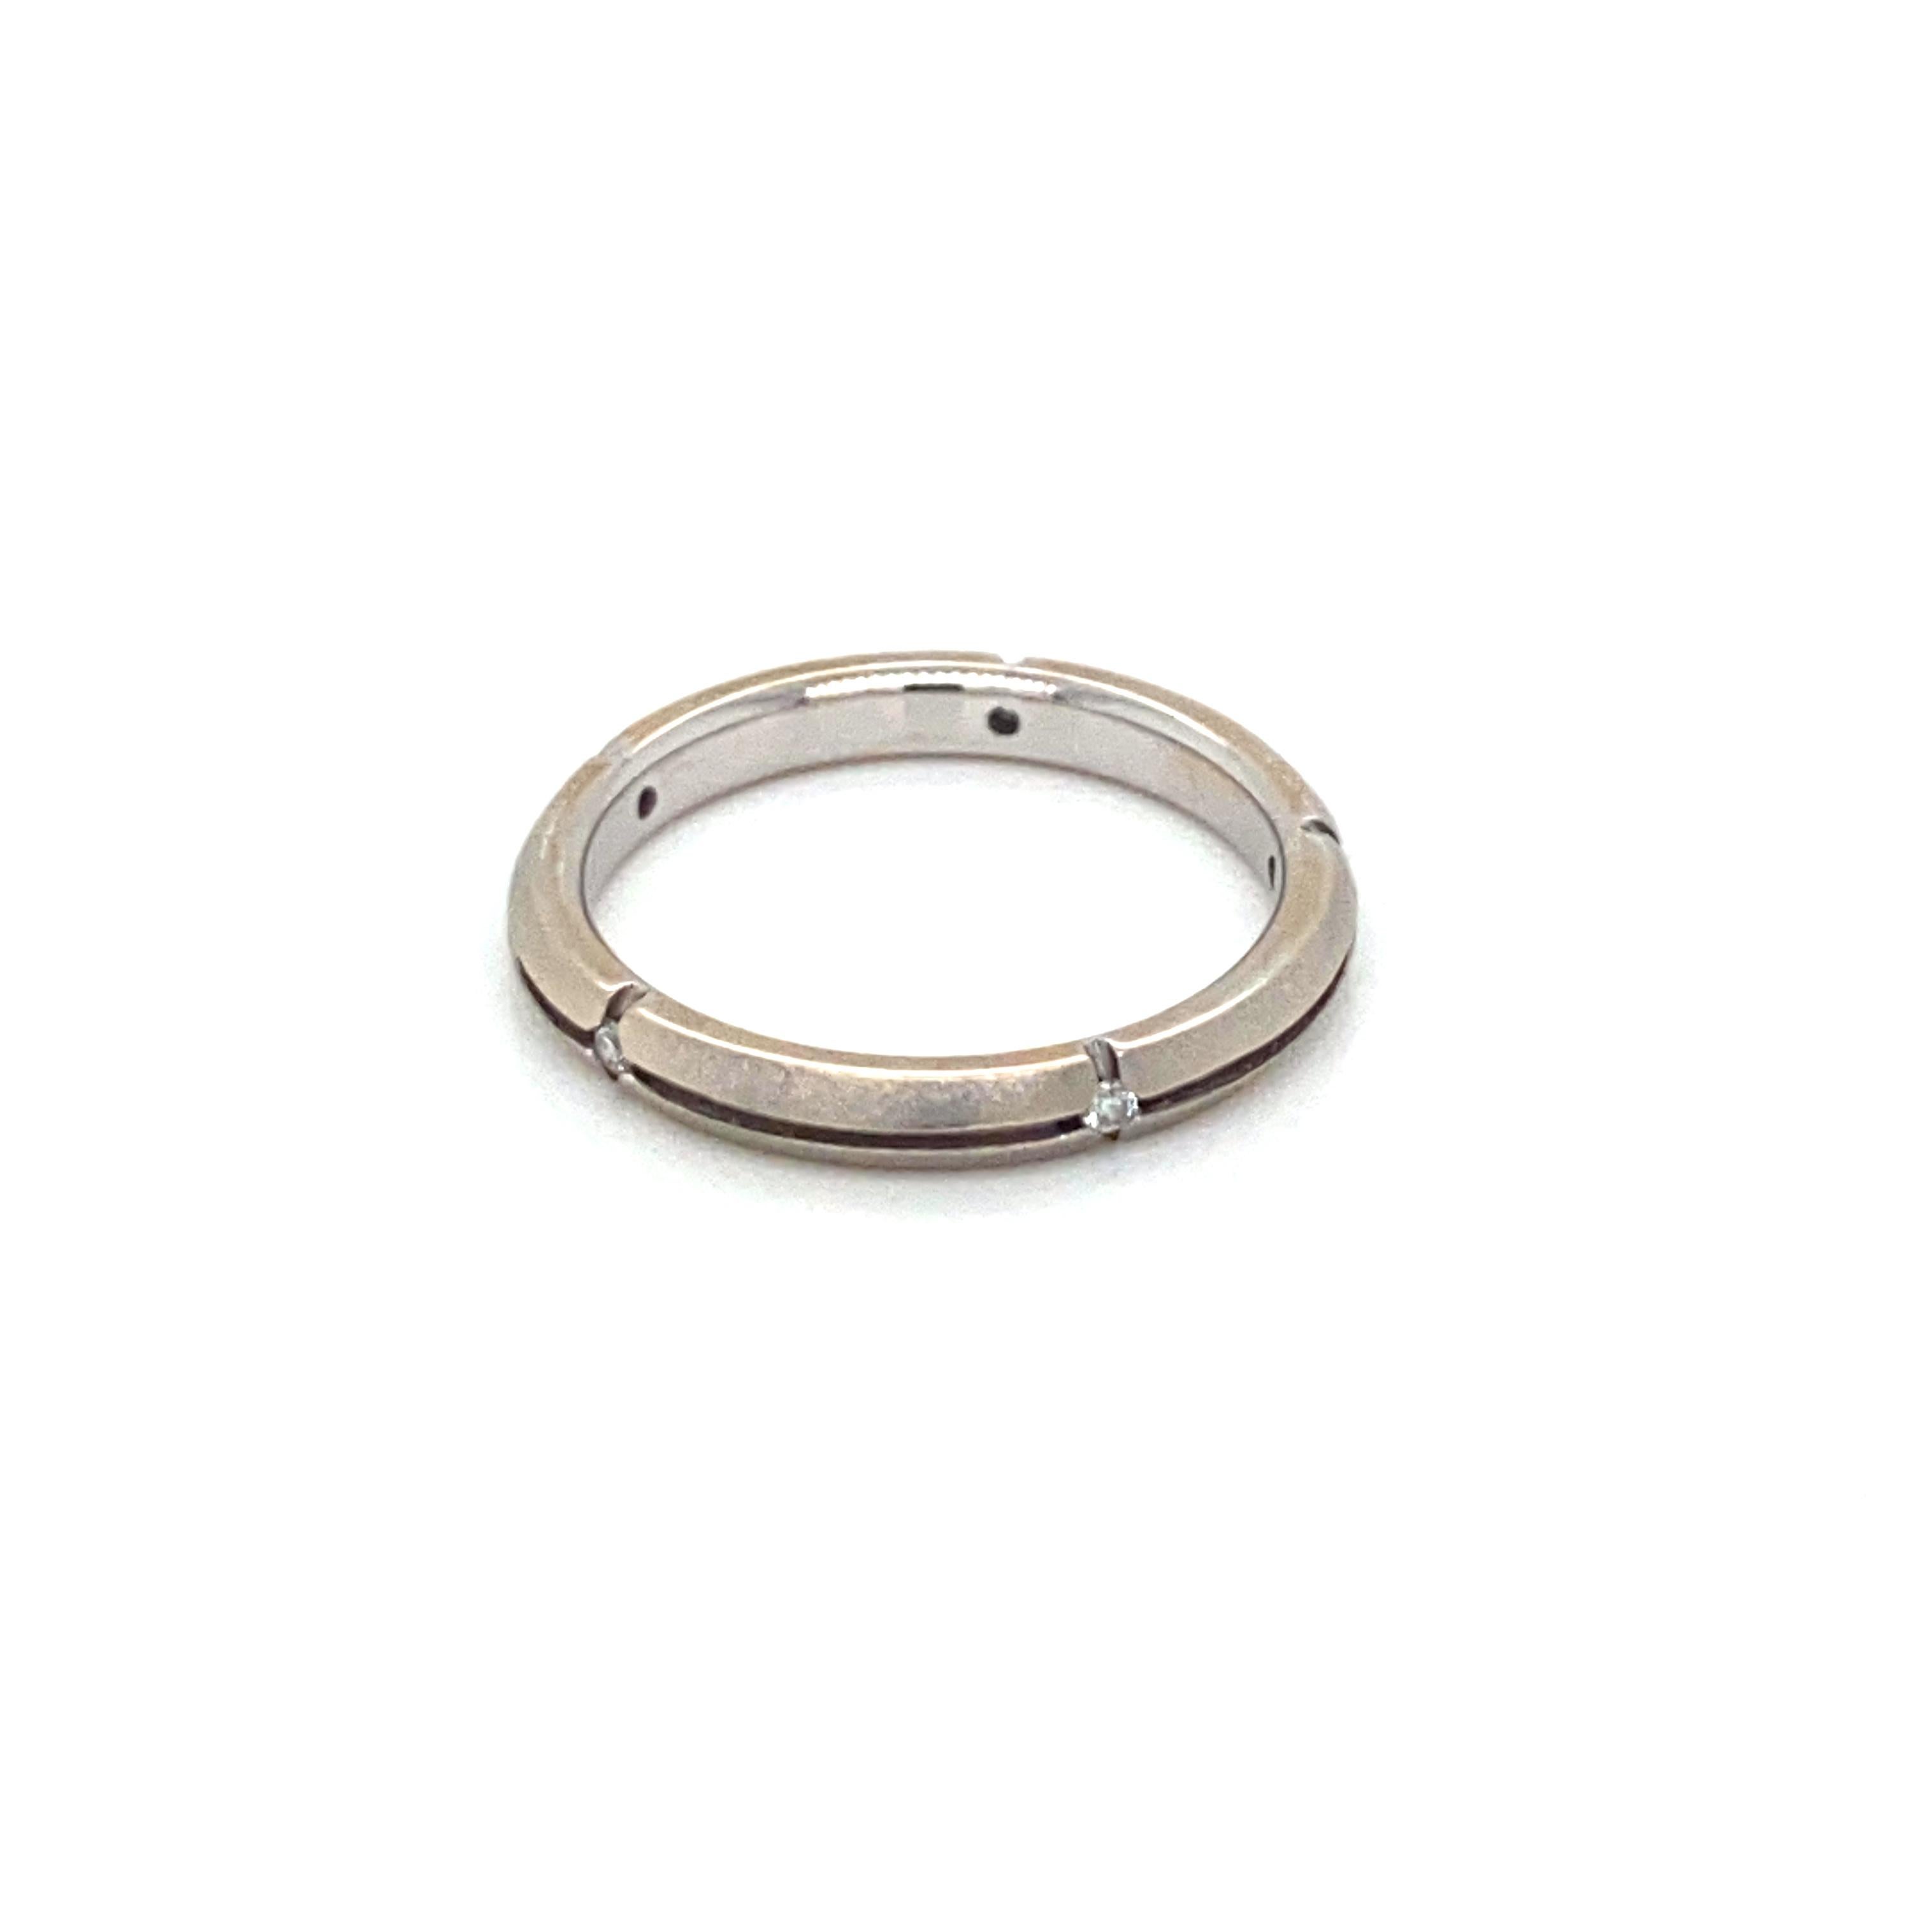 Simply and classy, this elegant Tiffany & Co. Diamond Satin Band Gold Ring, is made in solid 18k white gold and it is set with five sparkling round brilliant cut Diamond. Numbered and hallmarked inside the band, it comes with original Tiffany & Co.